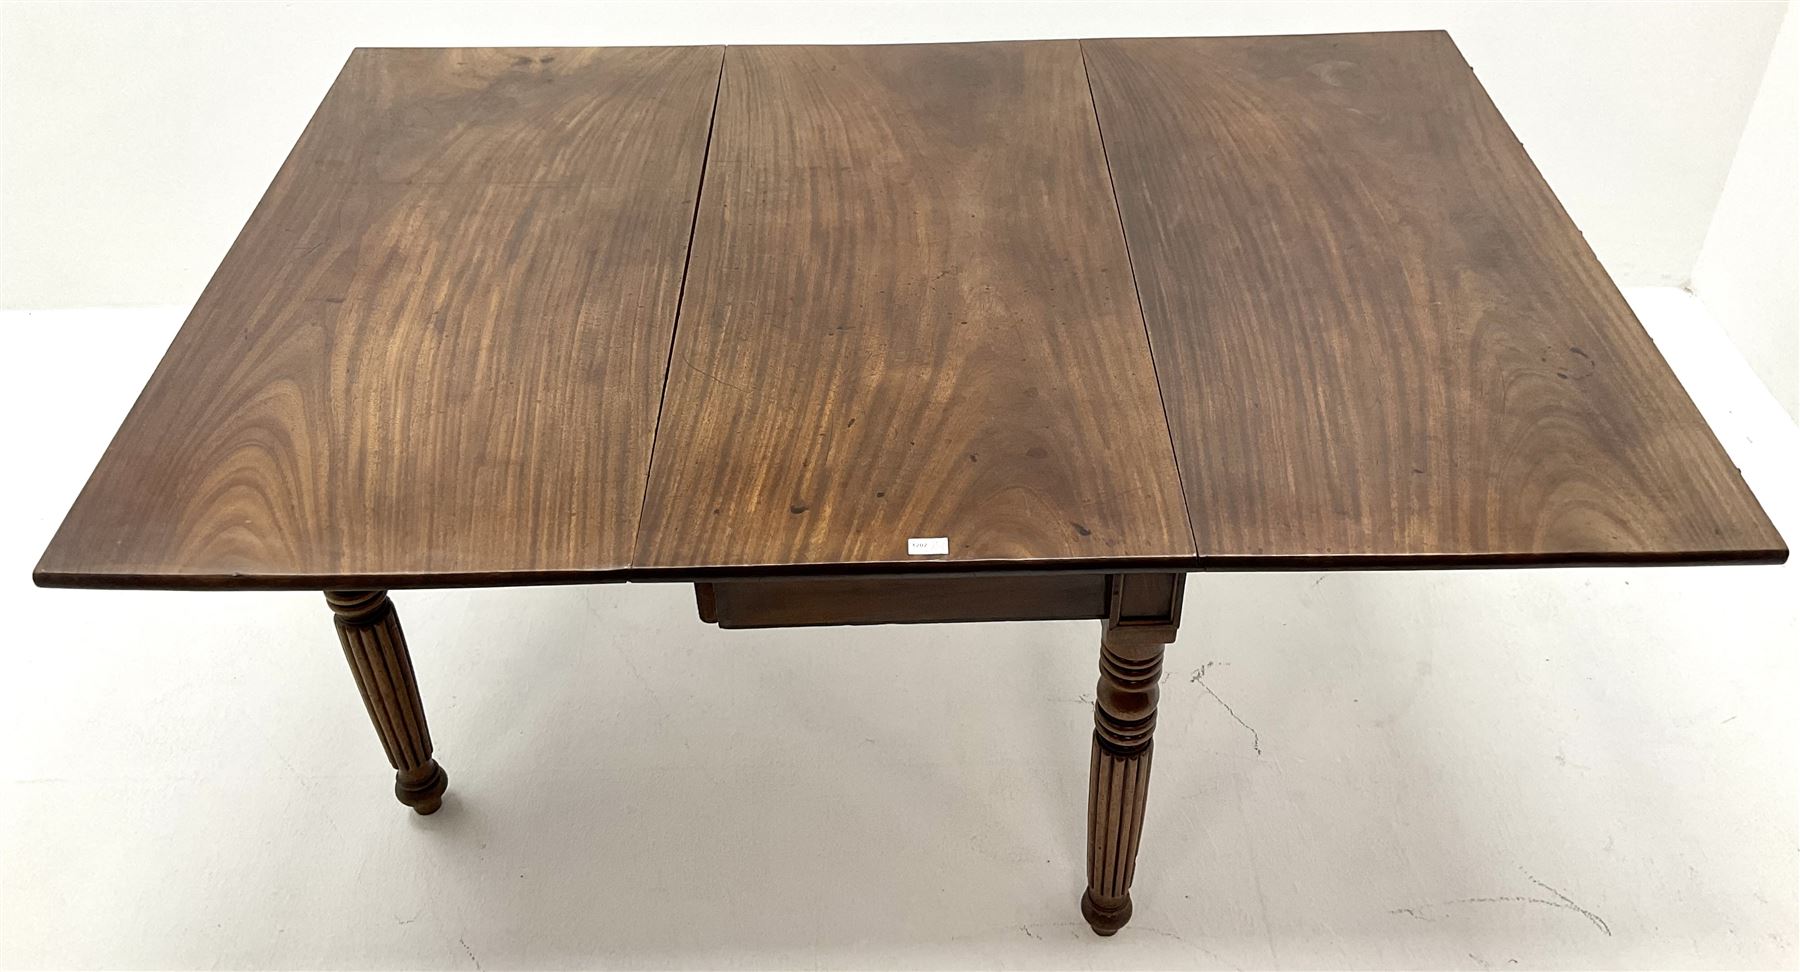 Early 19th century mahogany drop leaf dining table - Image 3 of 3